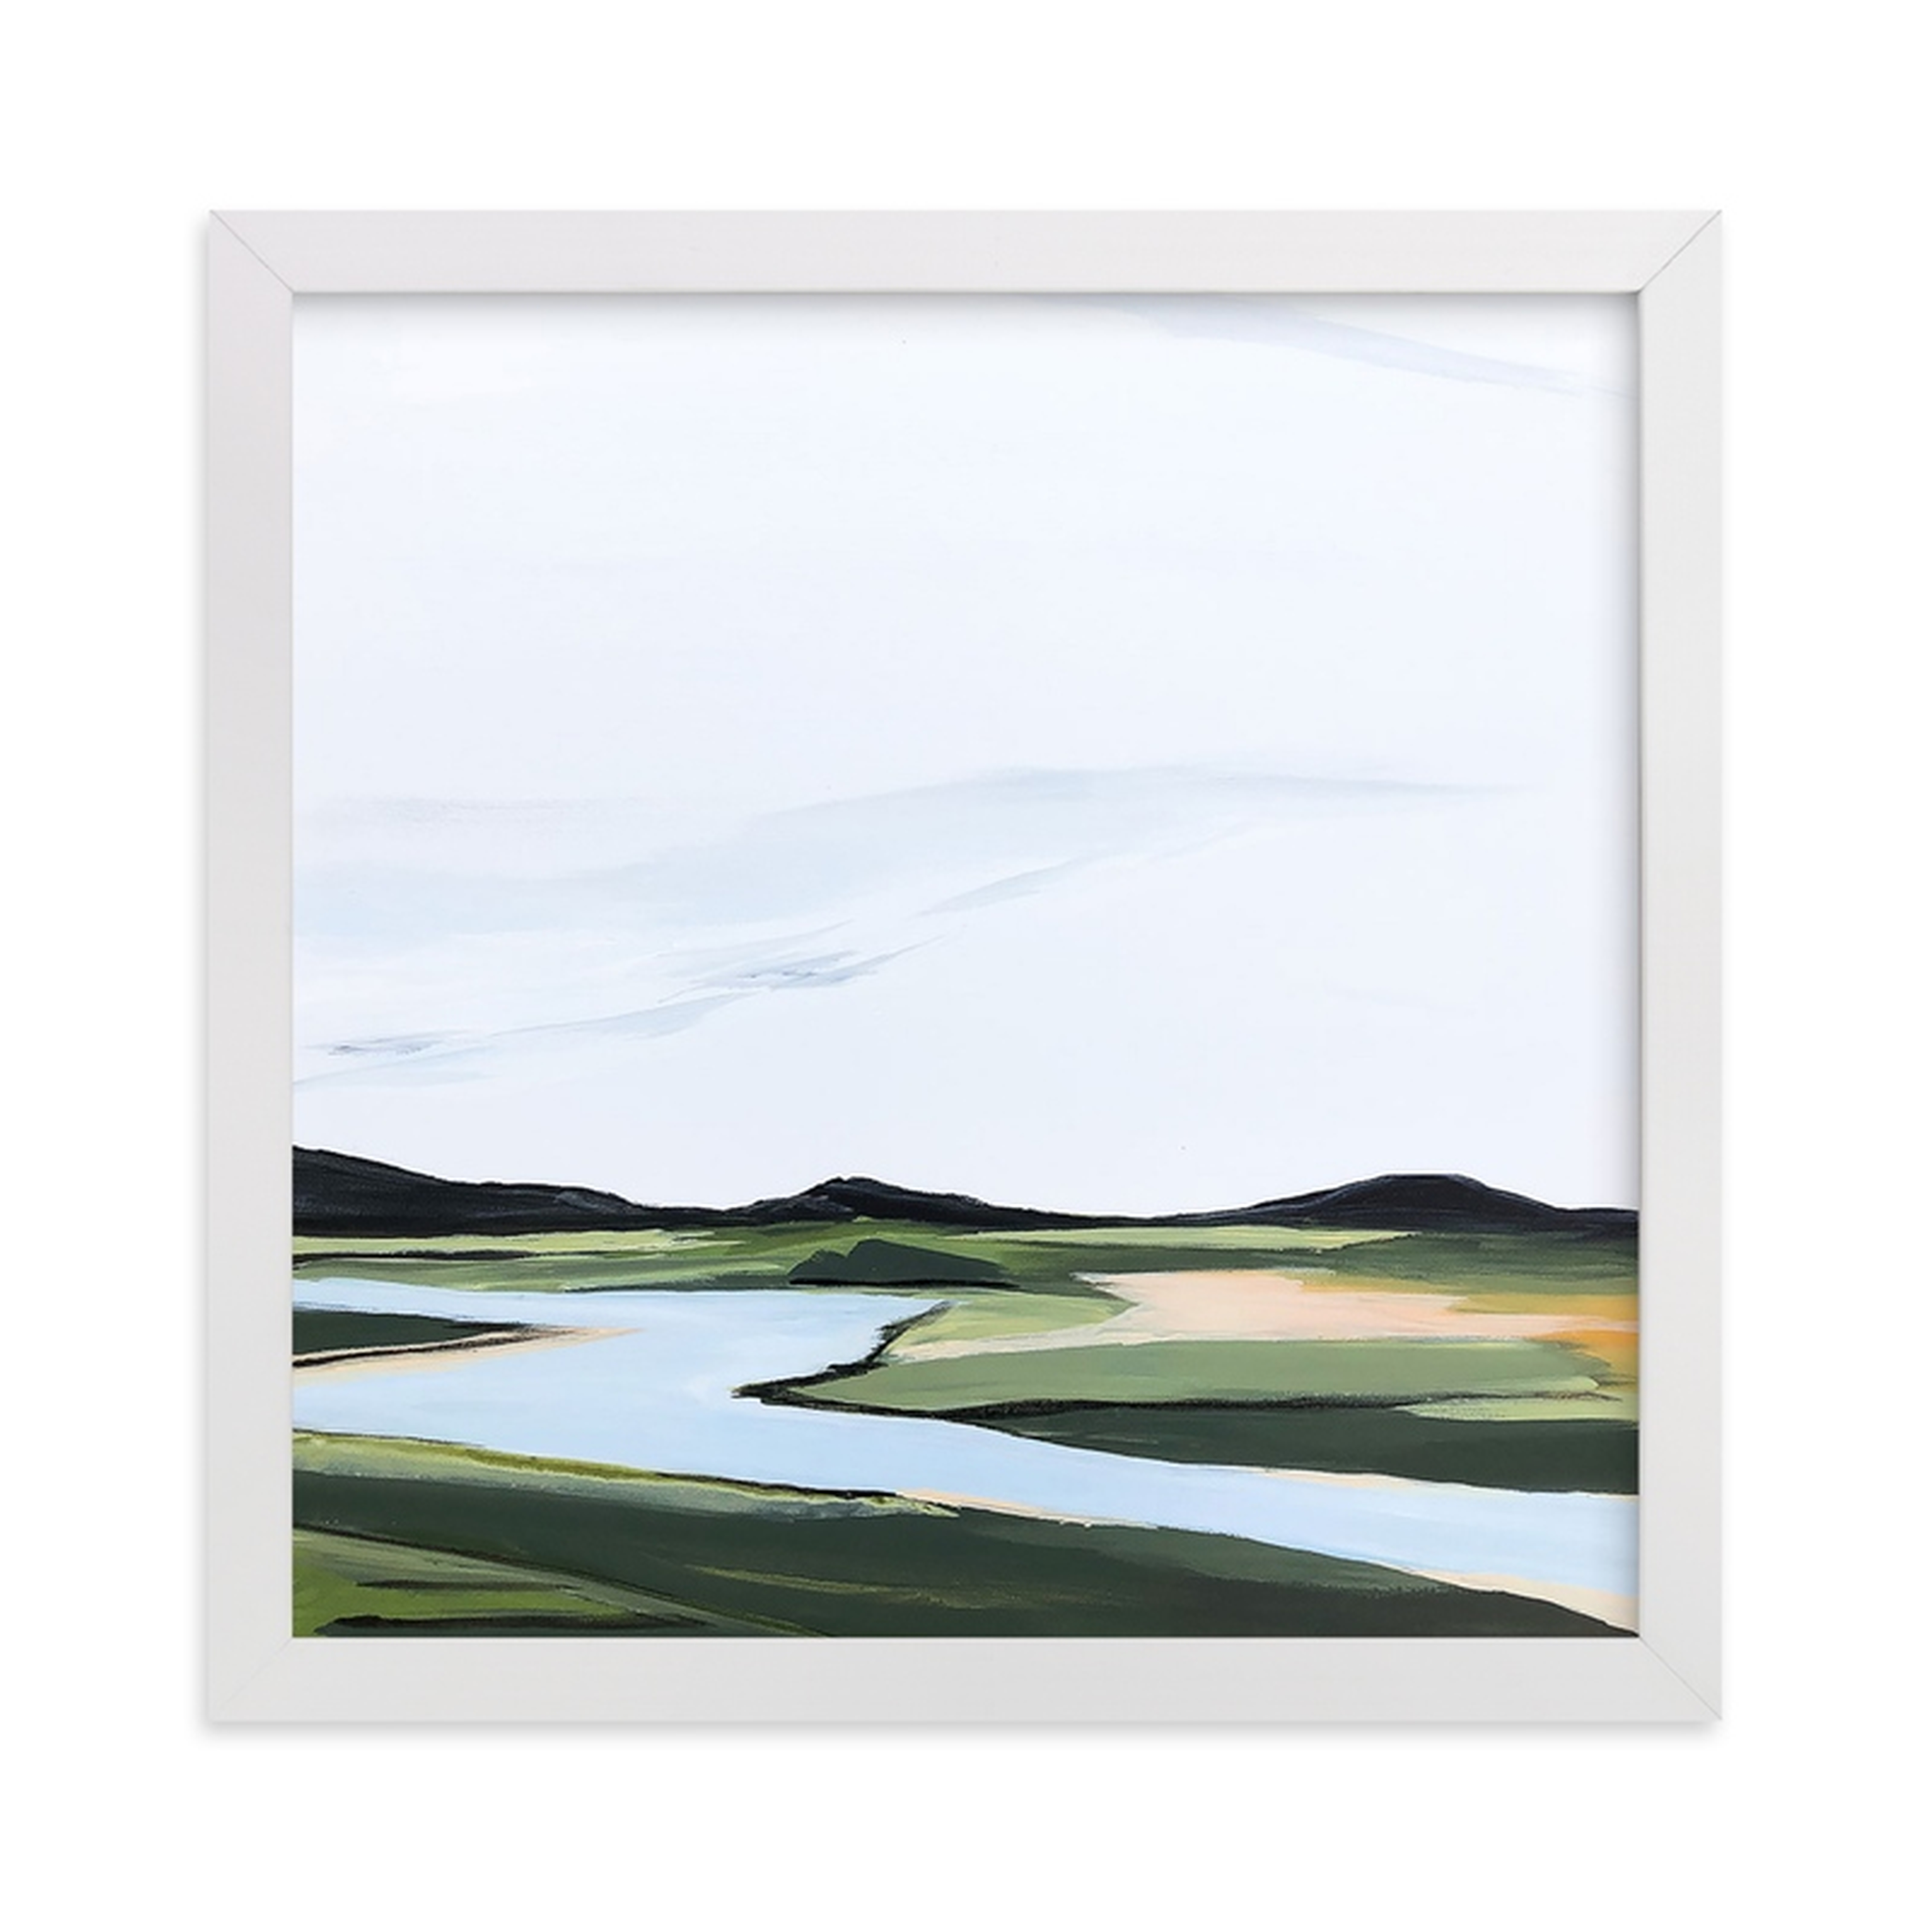 County Road River Bank Limited Edition Fine Art Print - Minted